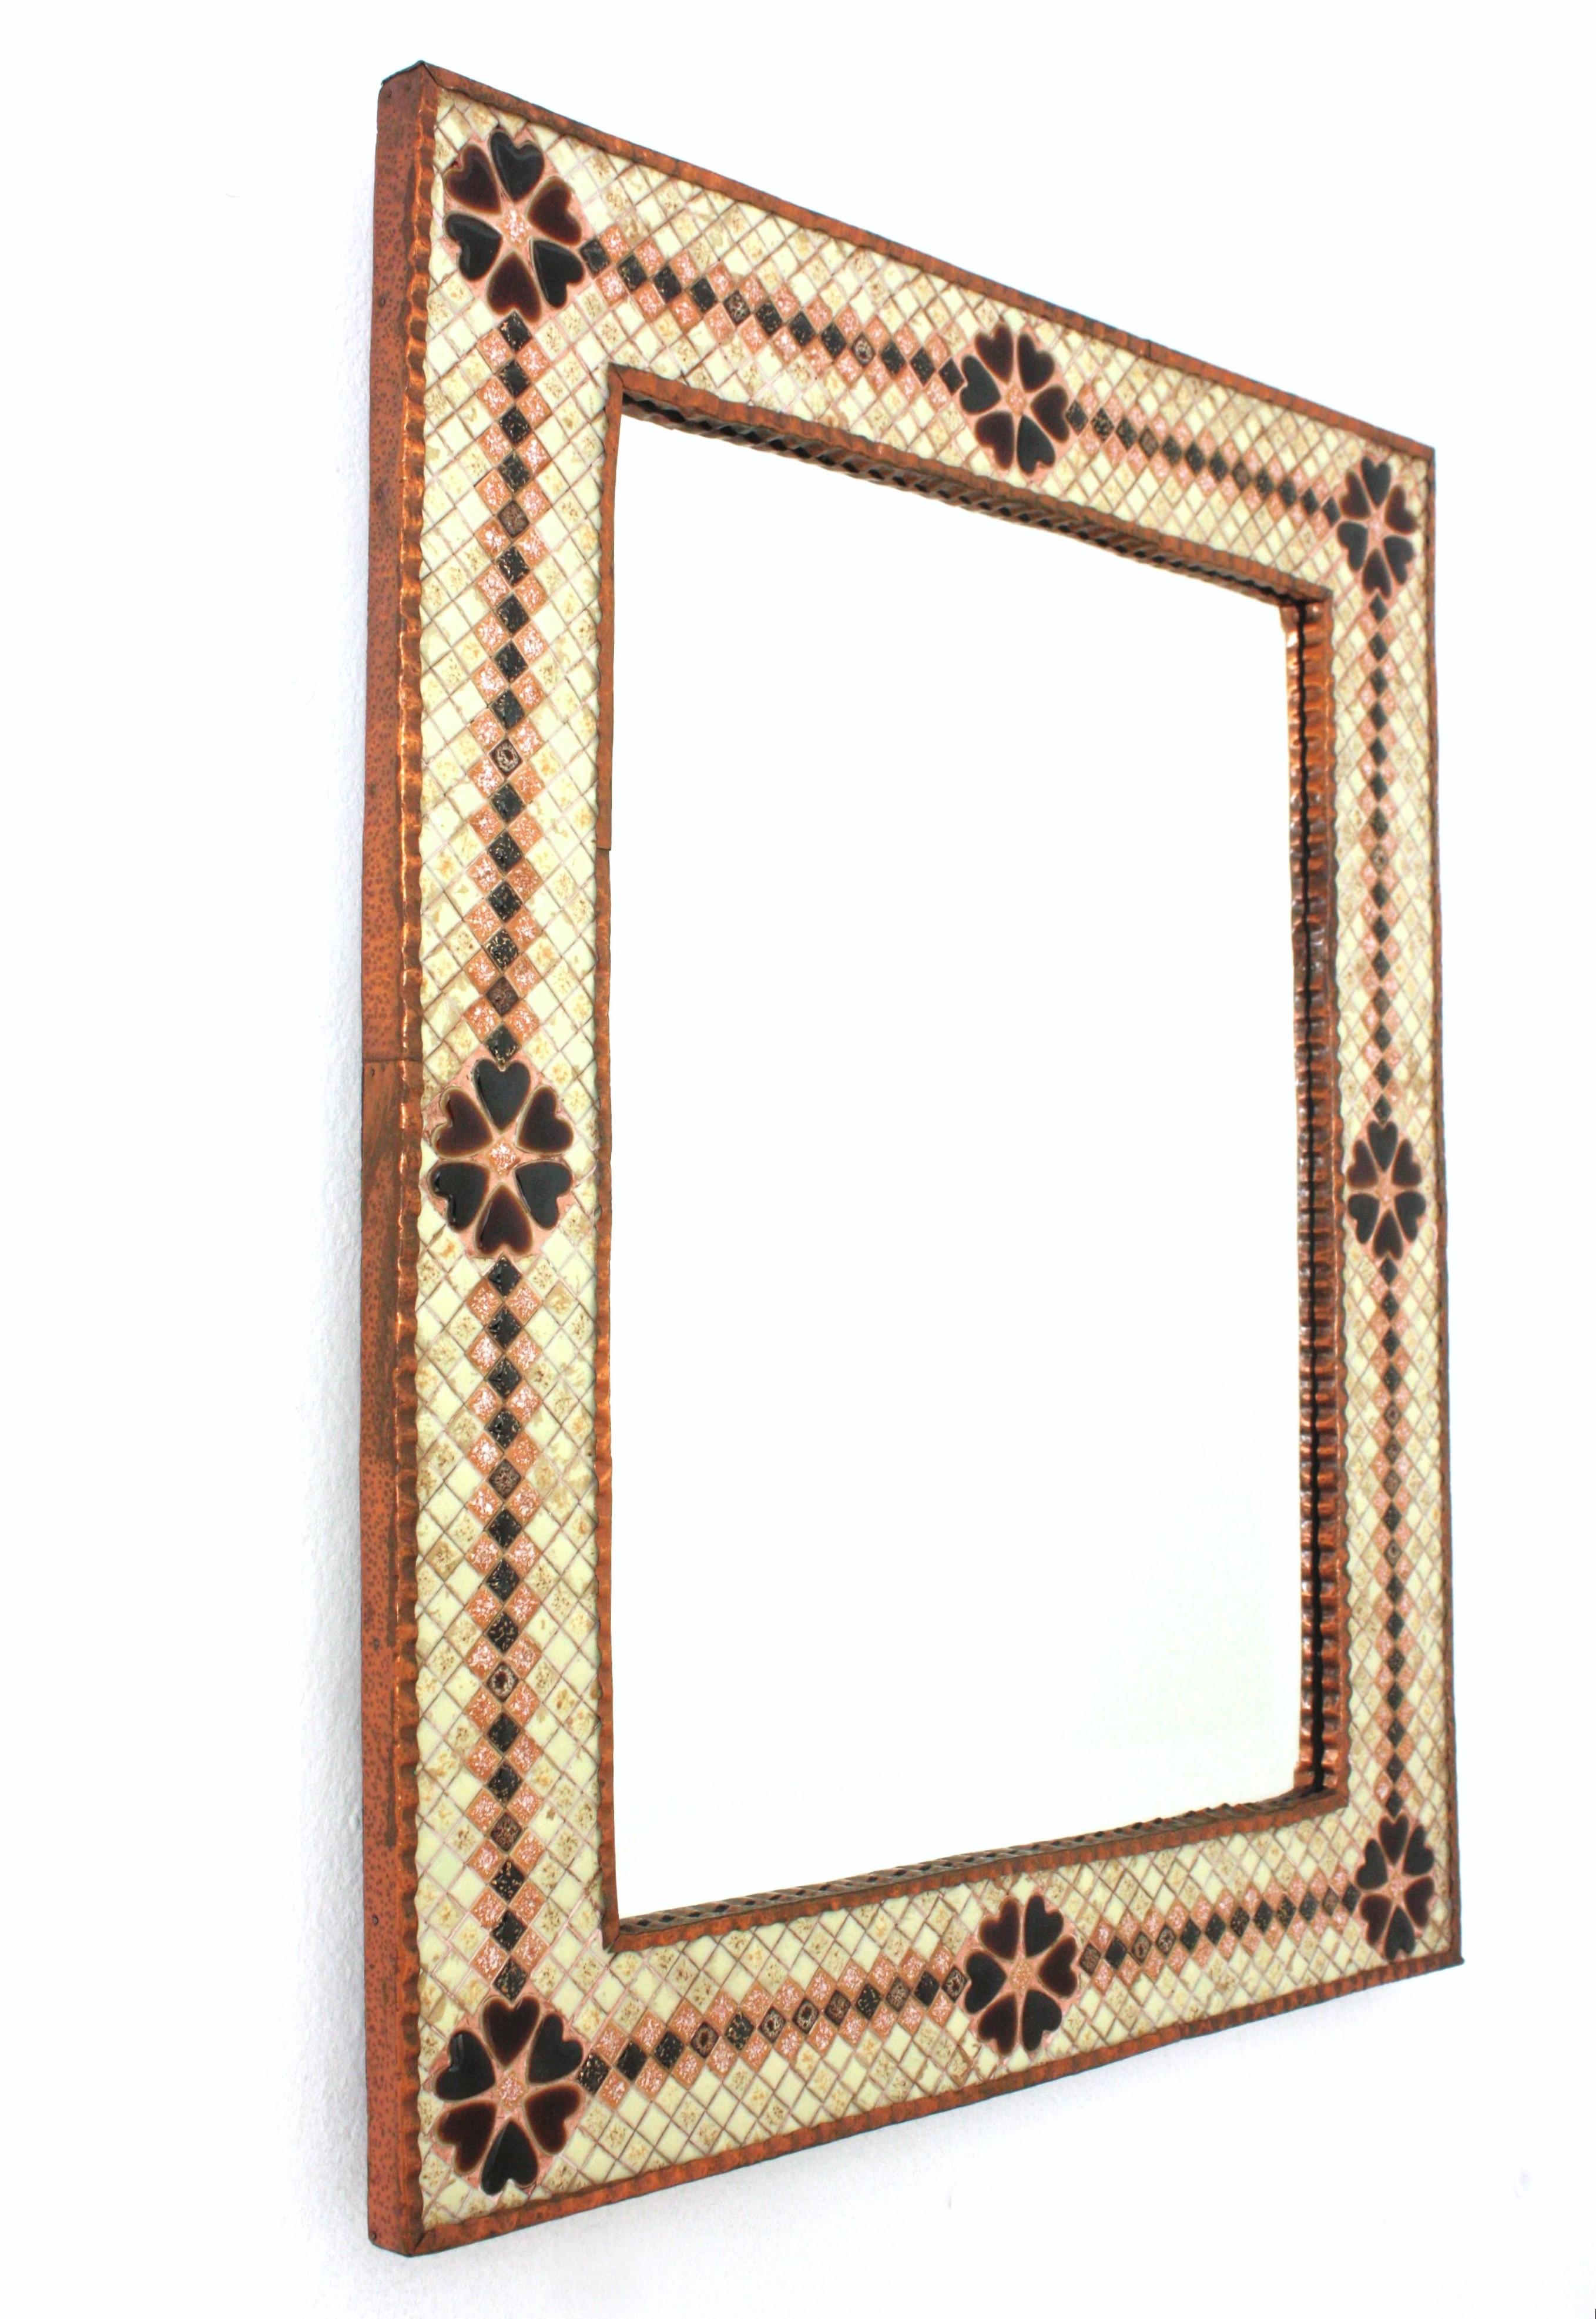 Spanish Tile Mosaic Rectangular Mirror in Glazed Ceramic, 1950s In Good Condition For Sale In Barcelona, ES